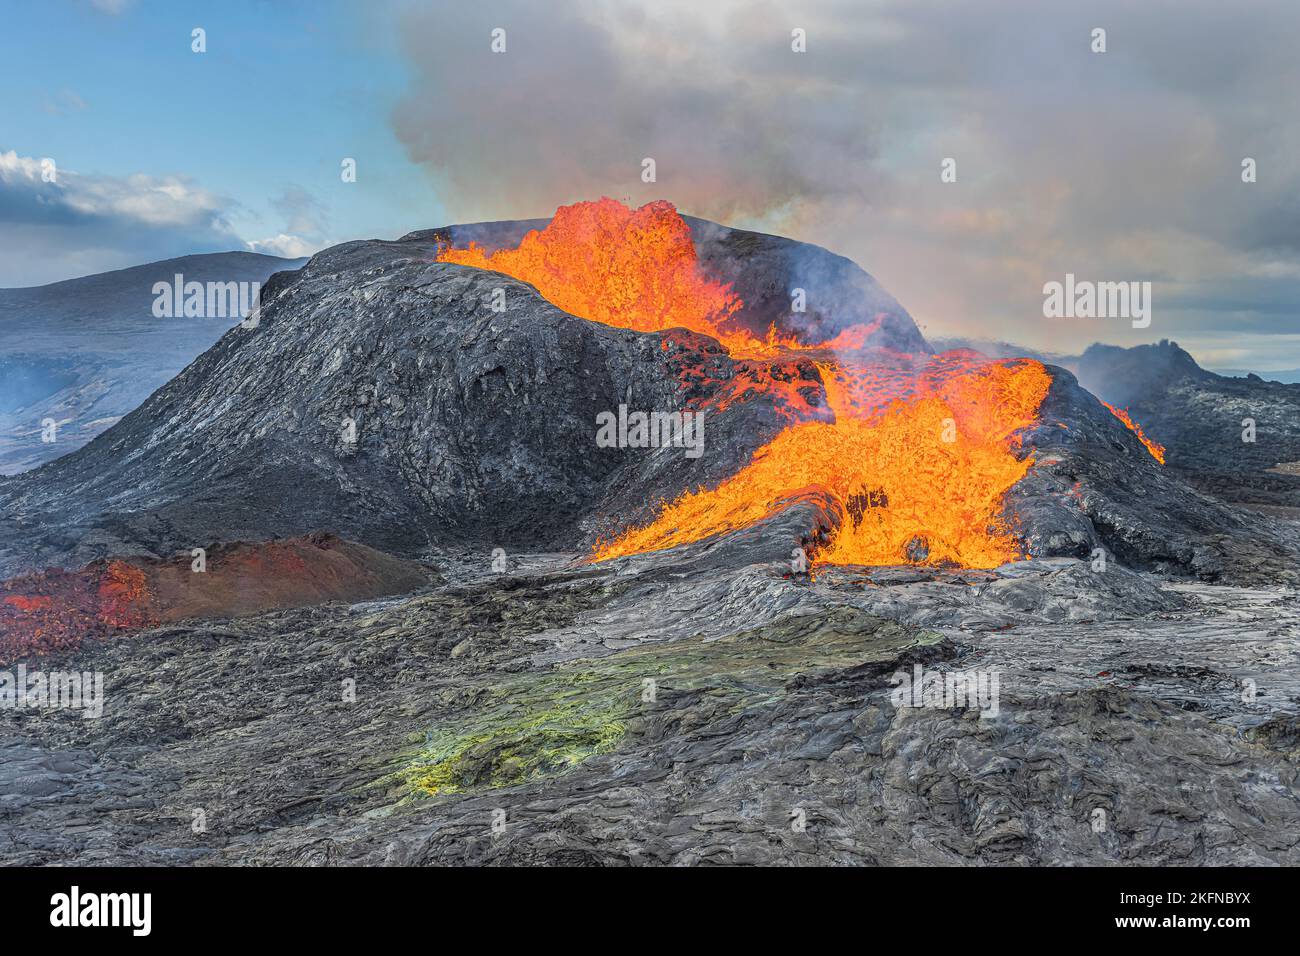 Landscape in Iceland of Reykjanes Peninsula. View of an active volcano with glowing lava. Volcanic crater to erupt during the day with sunshine. Stock Photo